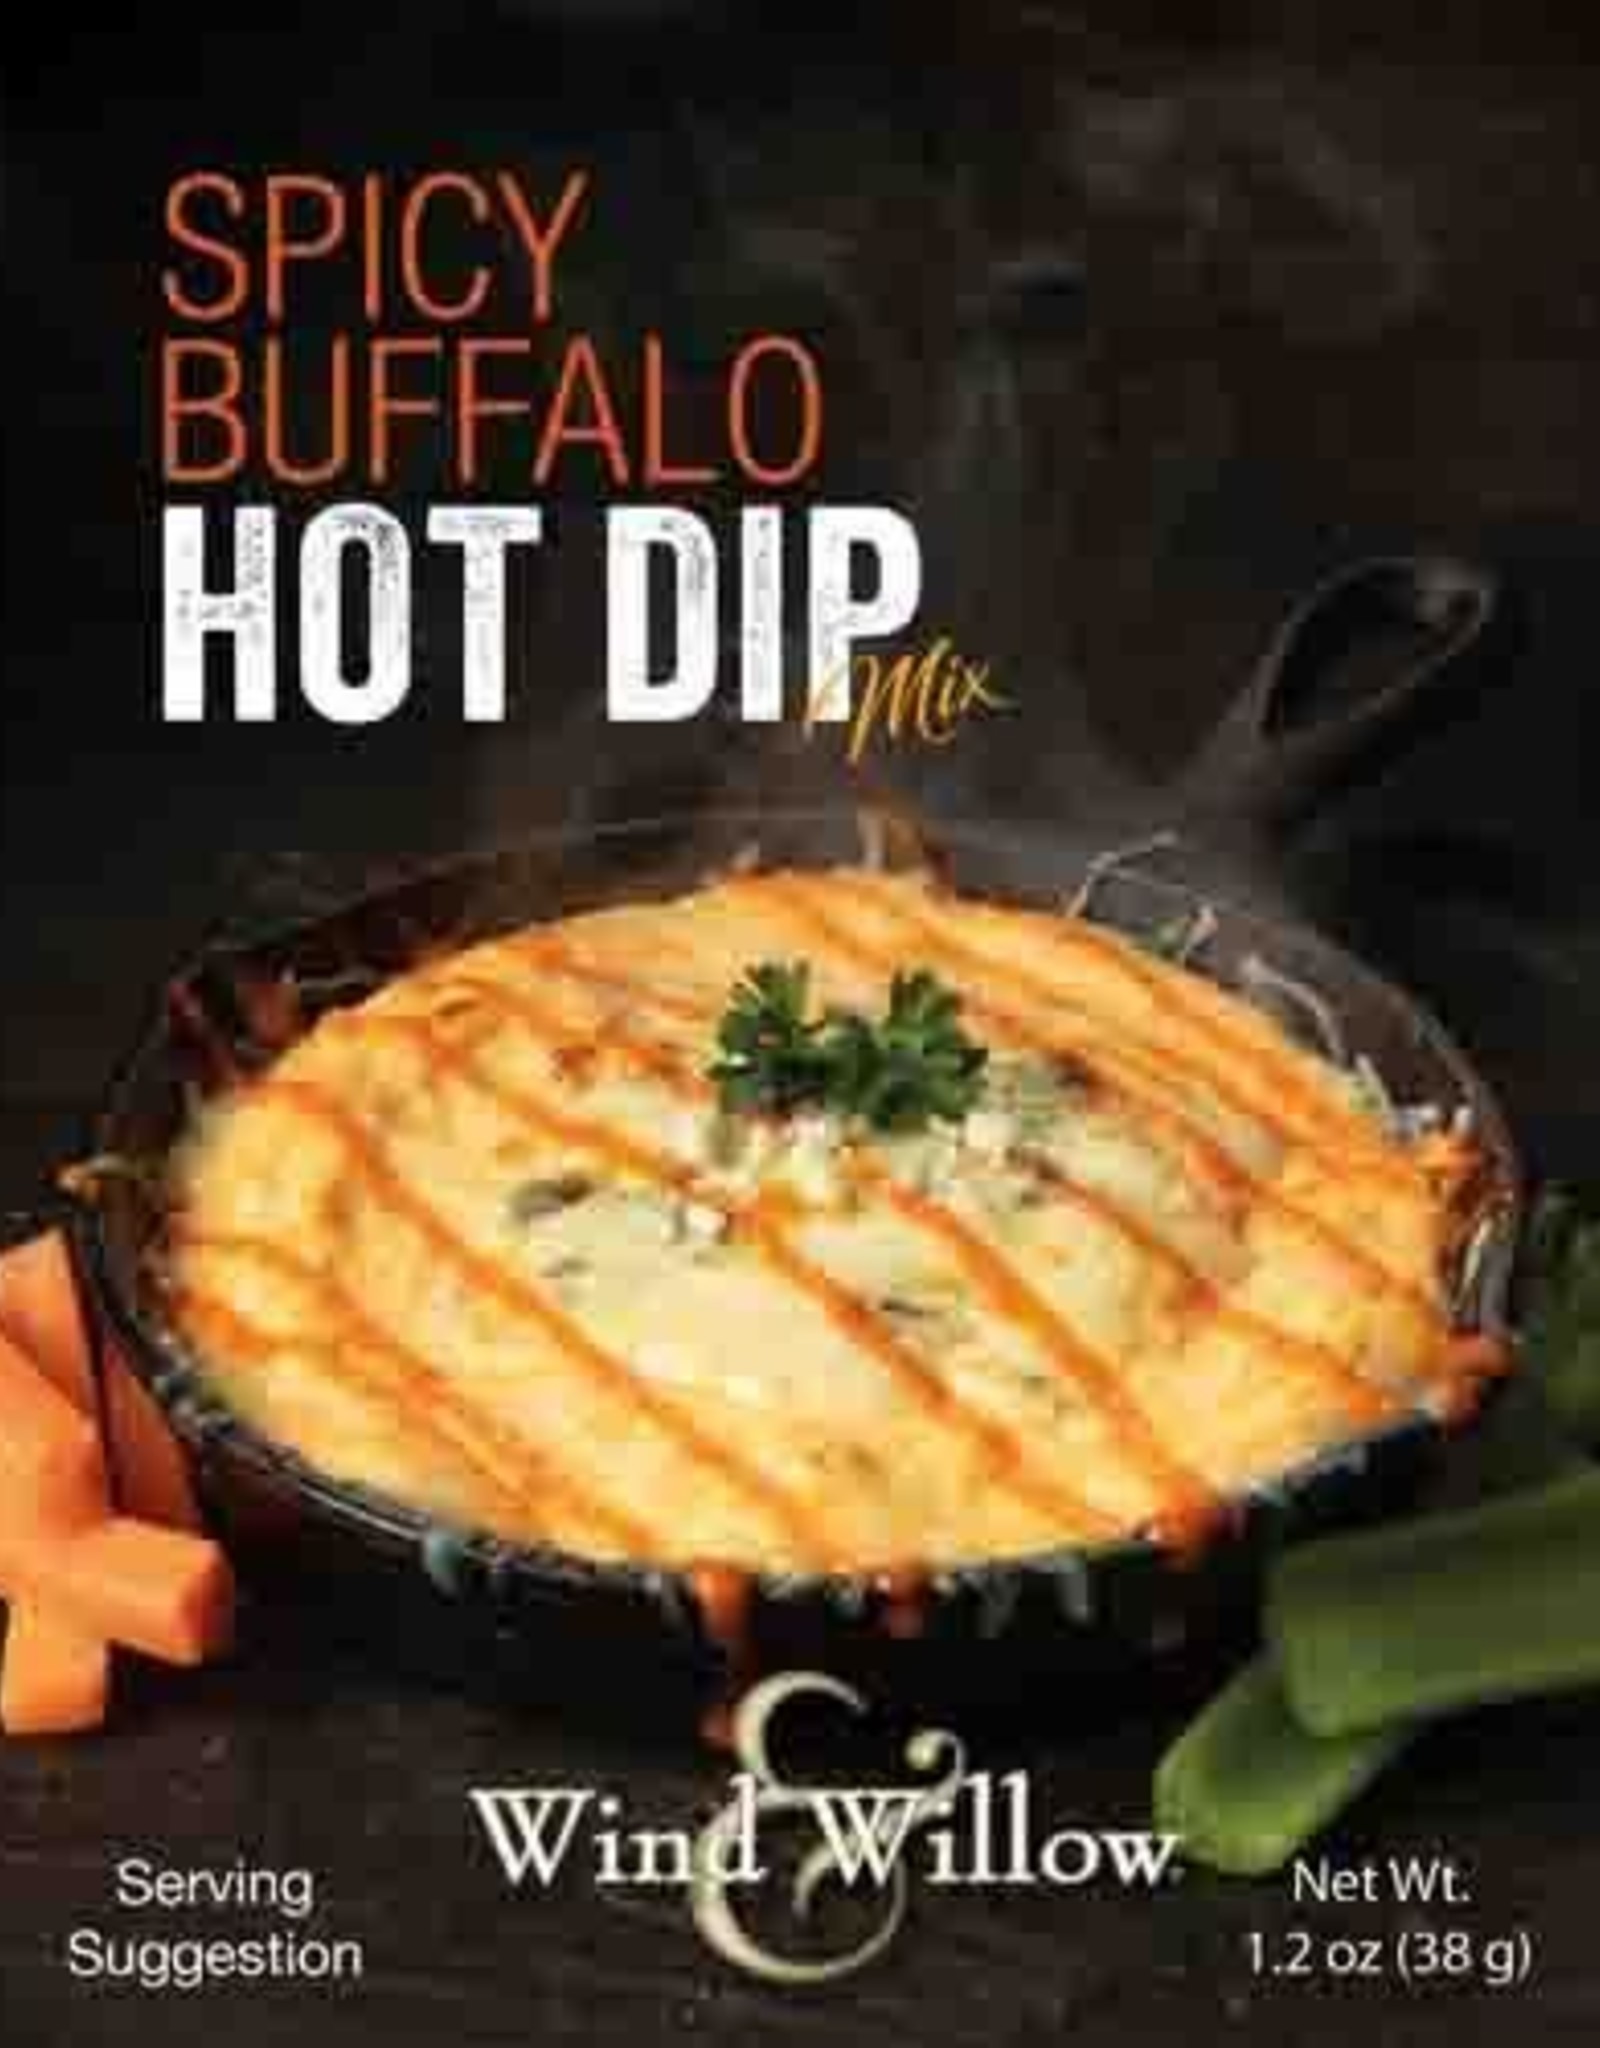 Wind and Willow WIND & WILLOW HOT DIP MIX - savory or sweet